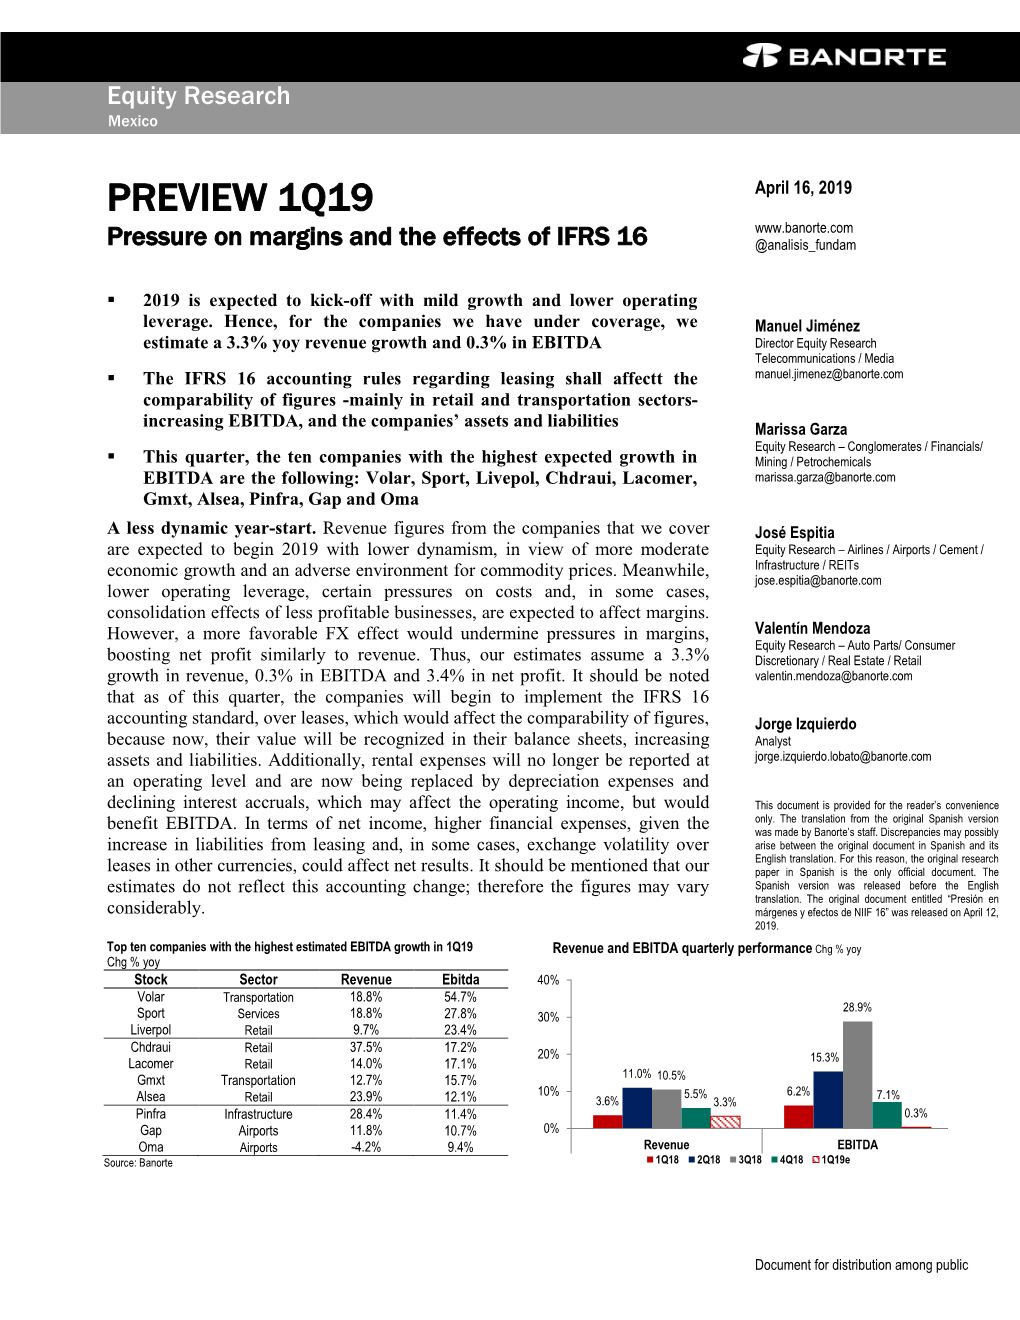 PREVIEW 1Q19 Pressure on Margins and the Effects of IFRS 16 @Analisis Fundam